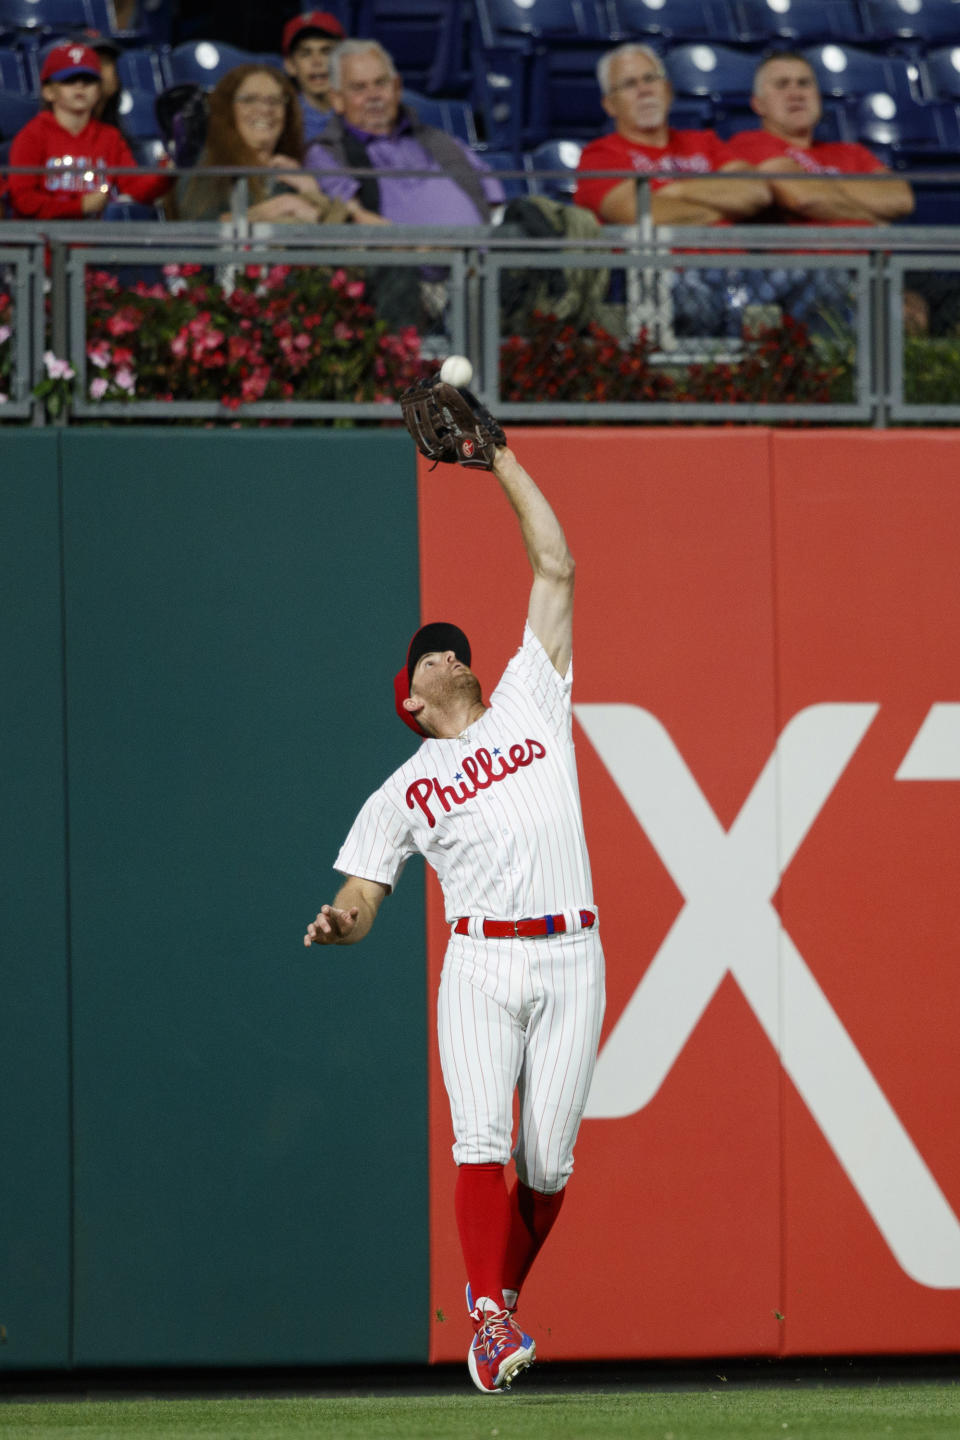 Philadelphia Phillies left fielder Brad Miller catches a fly out by Miami Marlins' Pablo Lopez during the fourth inning of a baseball game, Friday, Sept. 27, 2019, in Philadelphia. (AP Photo/Matt Slocum)